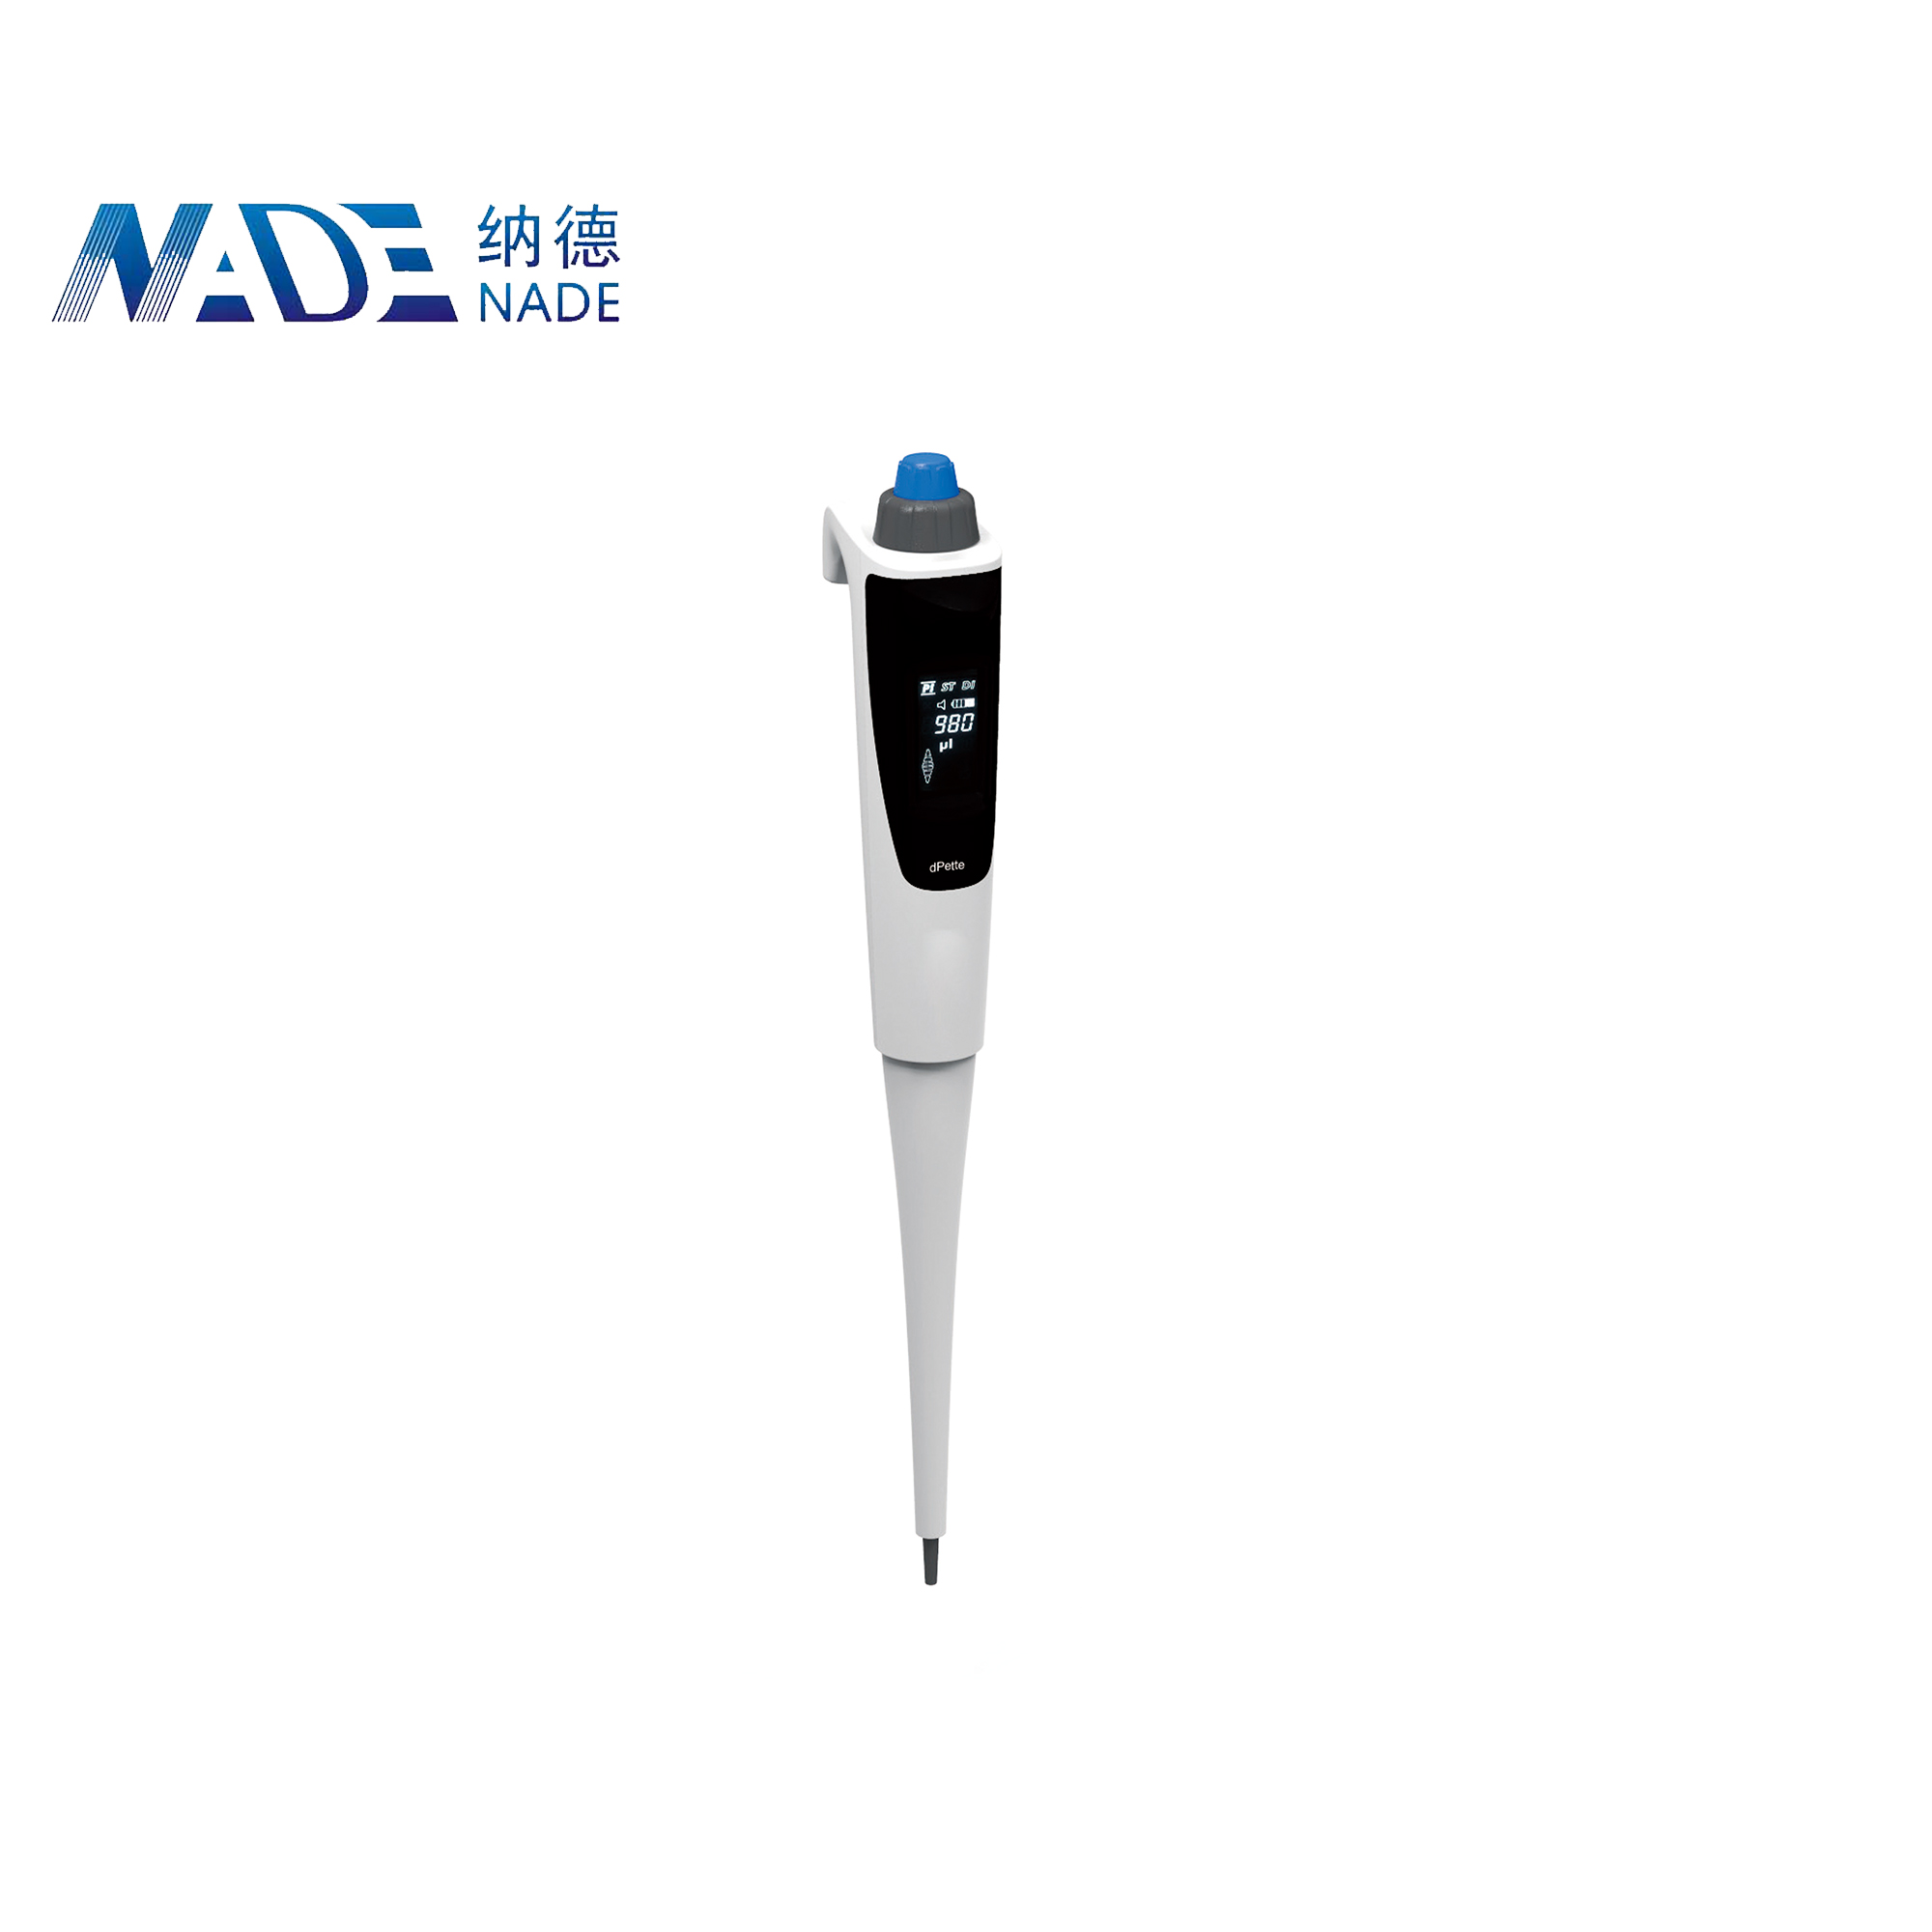 Nade Lab Multifunction Electronic Pipette dPette+ use for Pipetting, Mixing, Stepper and Dilution 0.5-1000ul